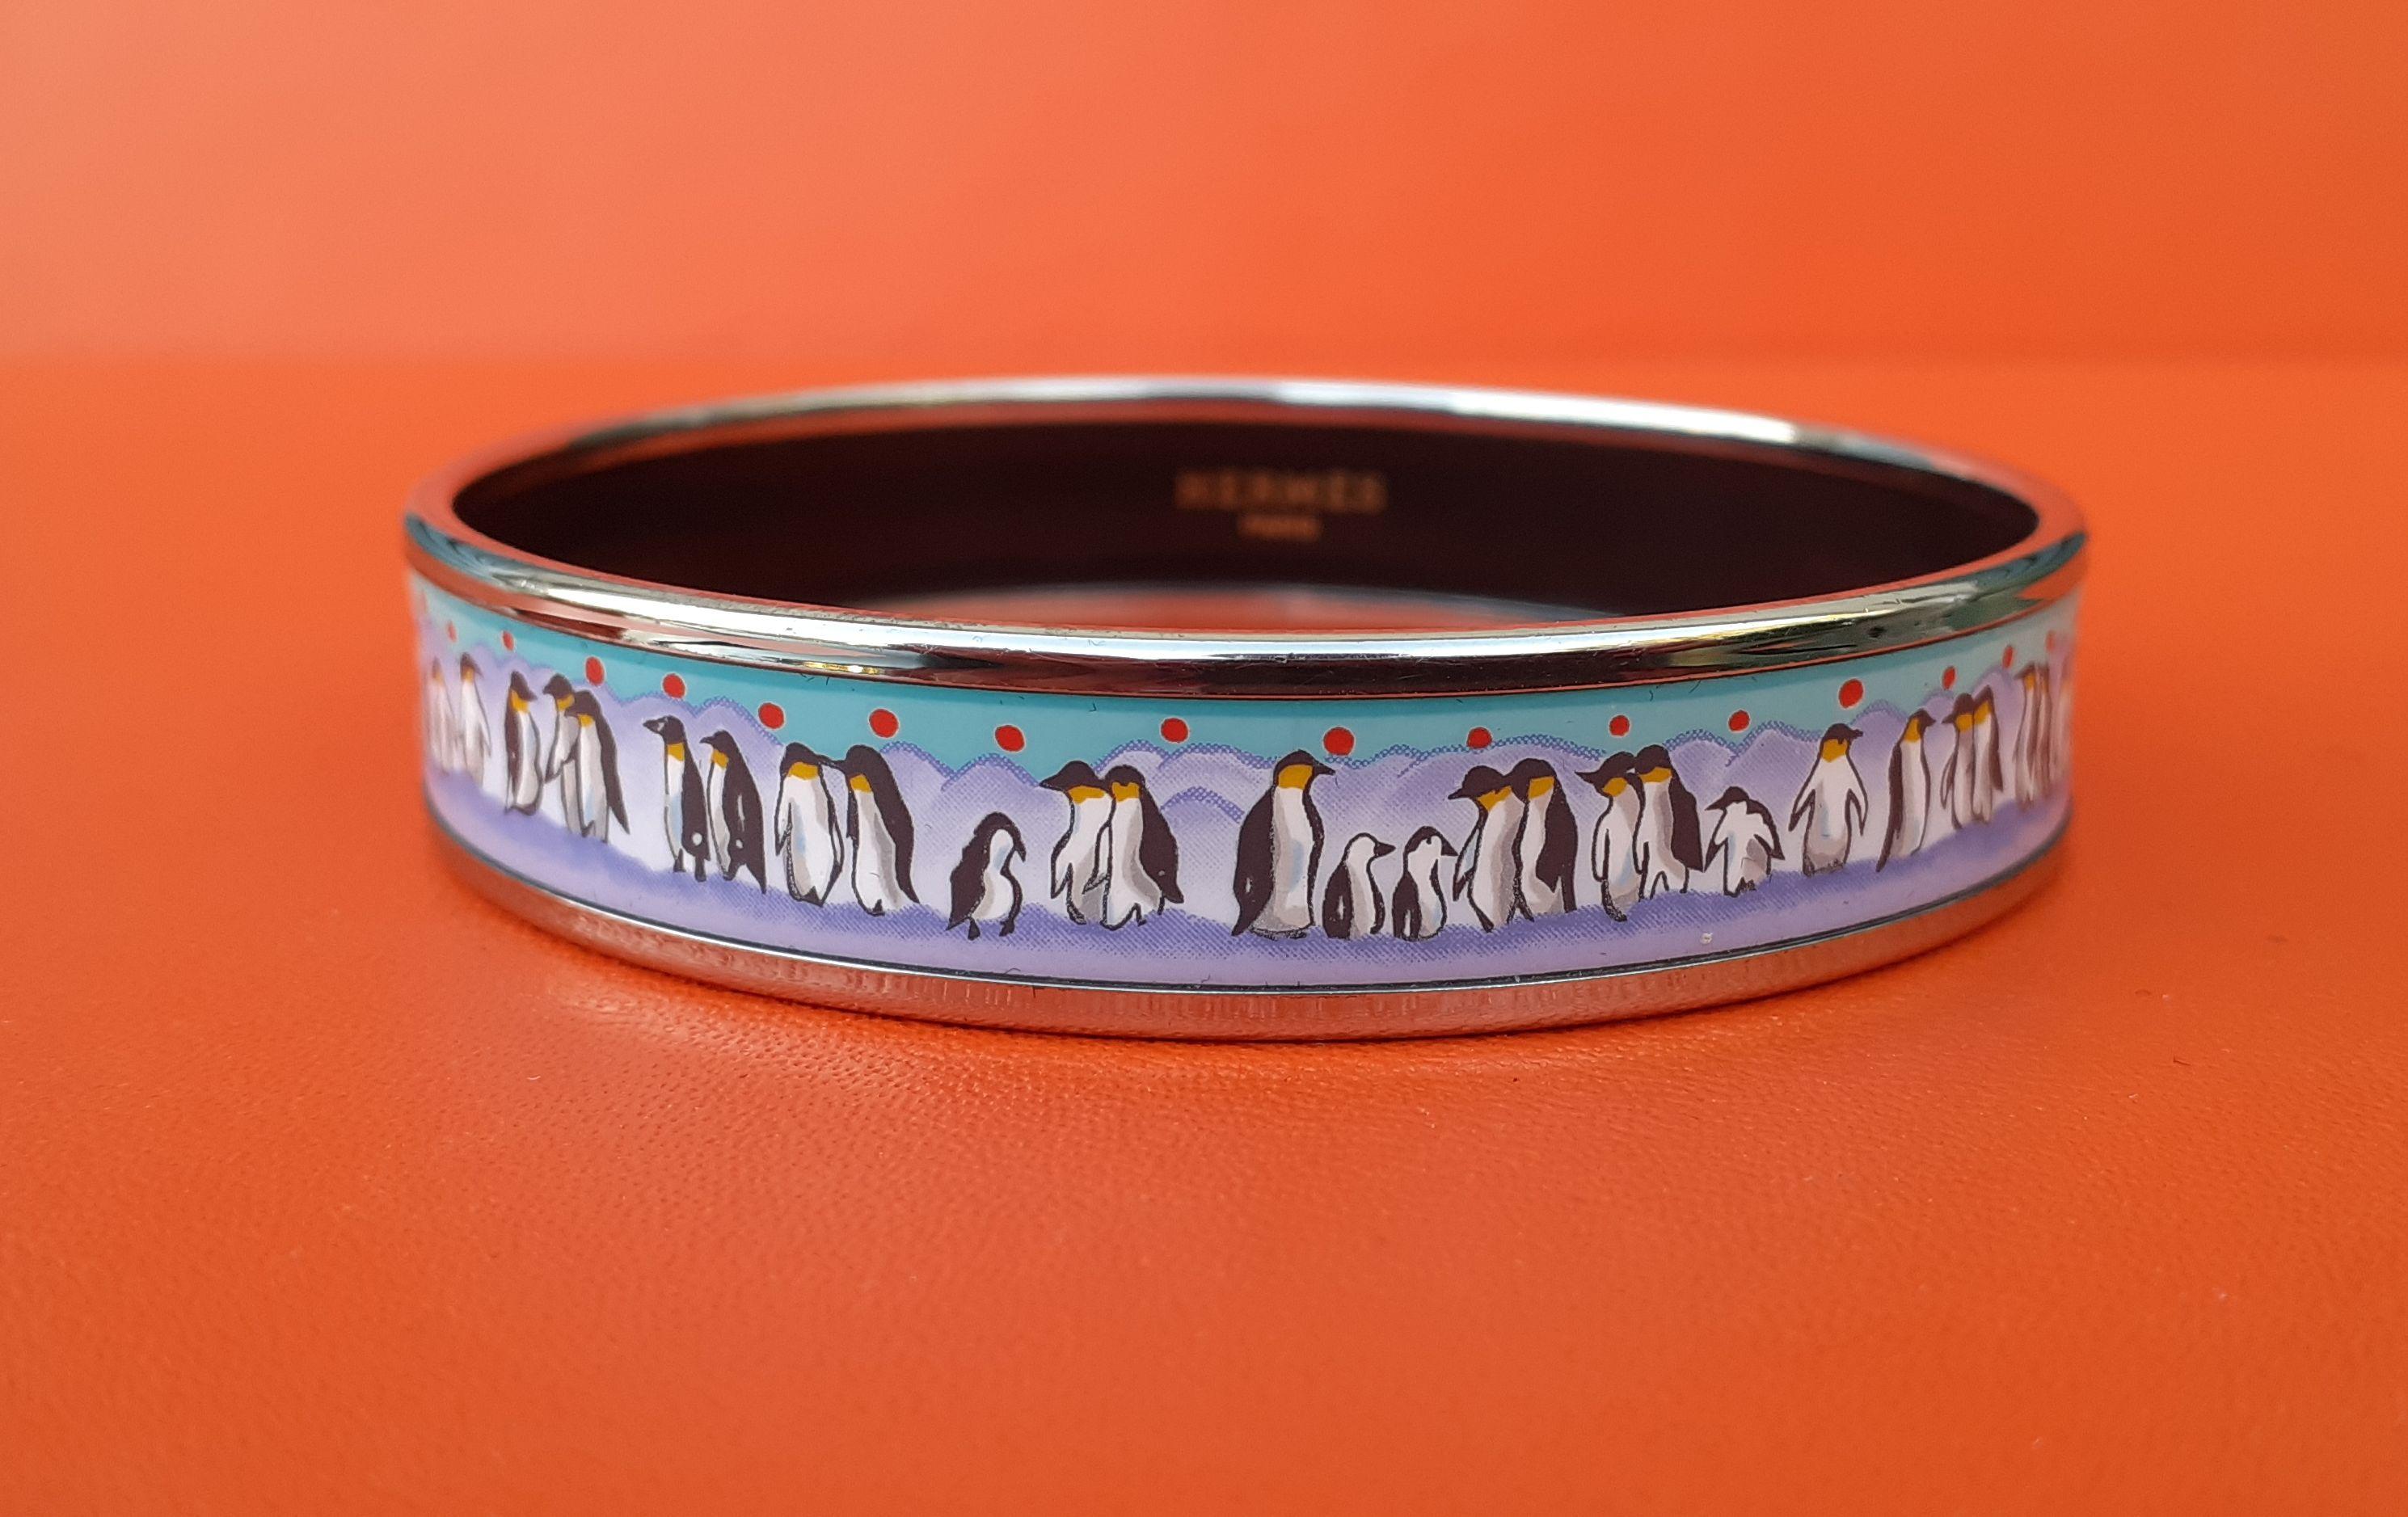 Beautiful Authentic Hermès Bracelet

Pattern: Penguins on ice

Made in Austria + E

Made of printed Enamel and Palladium plated Hardware (Silver-Tone)

Colorways: Turquoise Blue and Purple Background, Black and White Penguins, Red polka